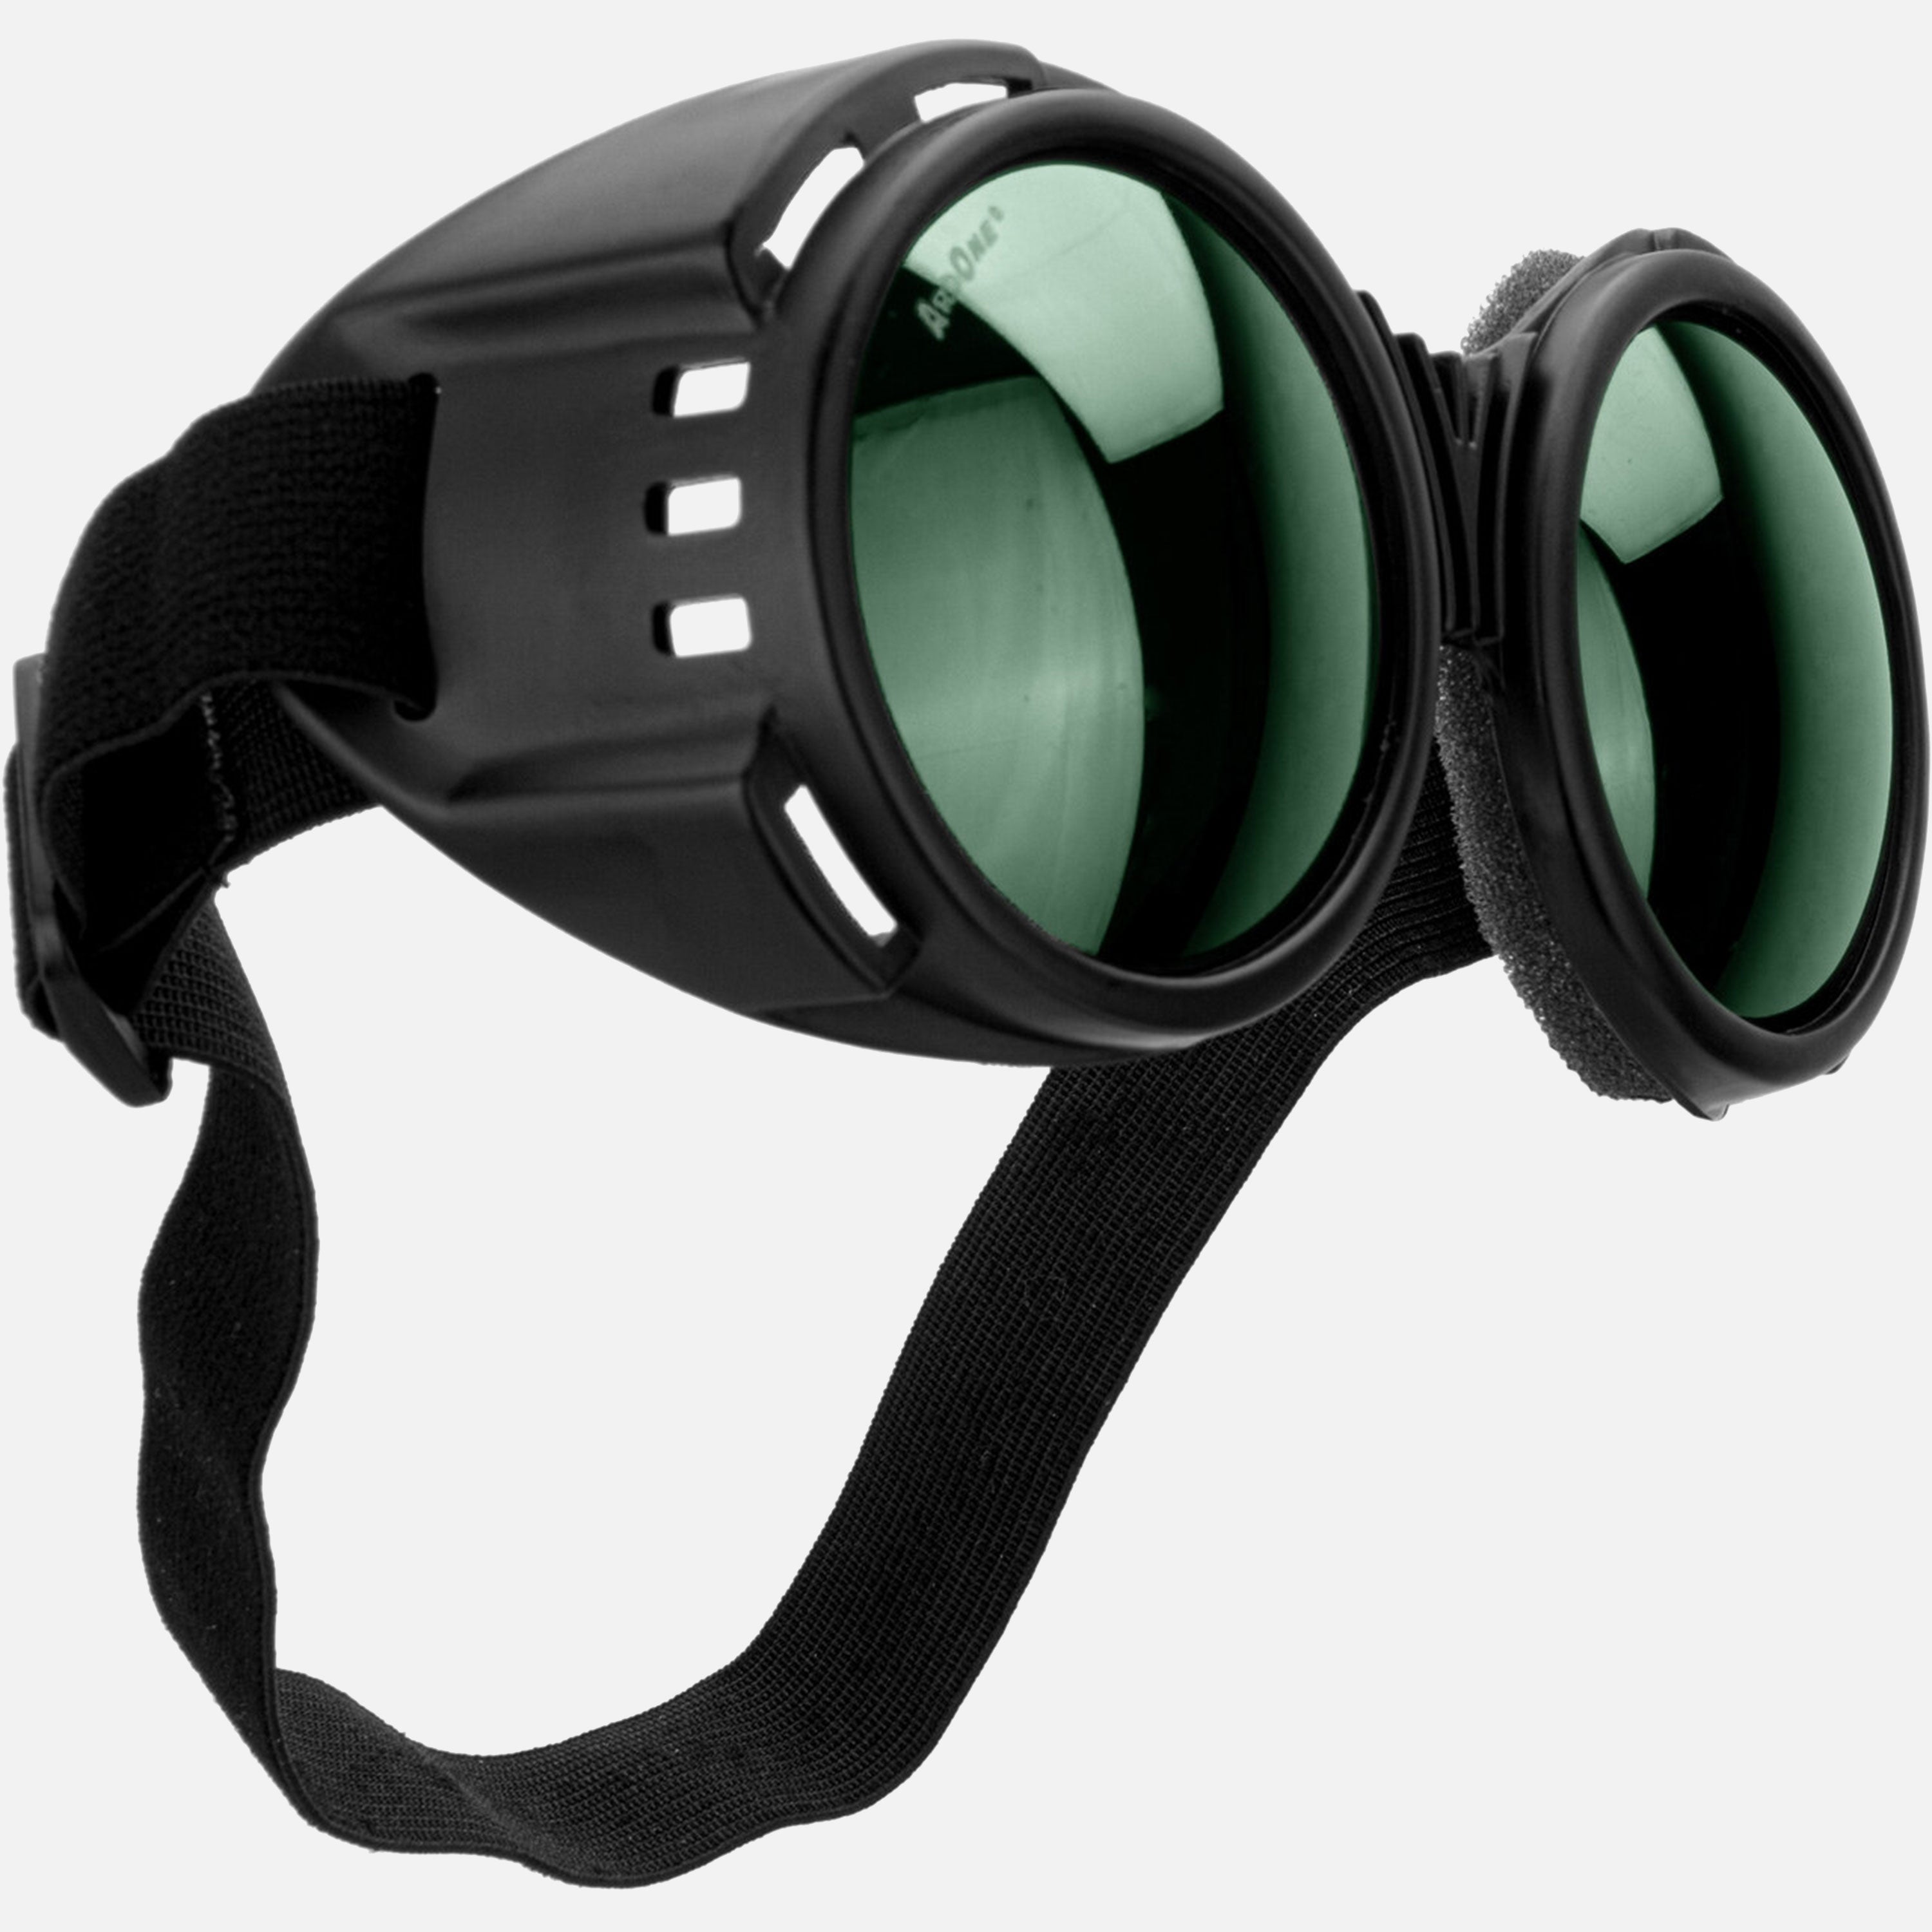 The Fly Safety Goggles, Flat Black Frame/IR3 Lens, Mirror Finish, Hard Coated